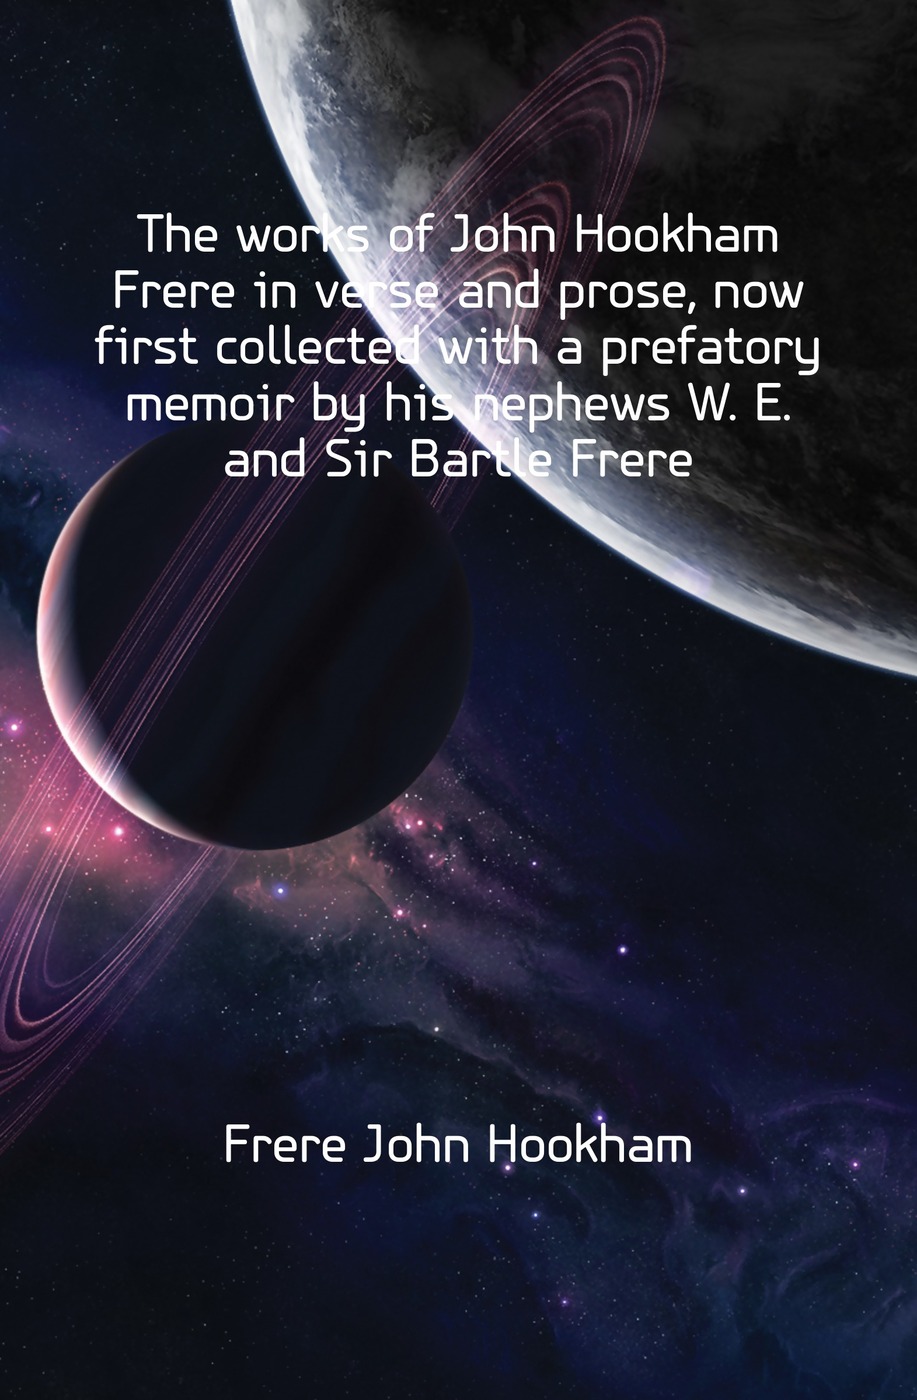 The works of John Hookham Frere in verse and prose, now first collected with a prefatory memoir by his nephews W. E. and Sir Bartle Frere